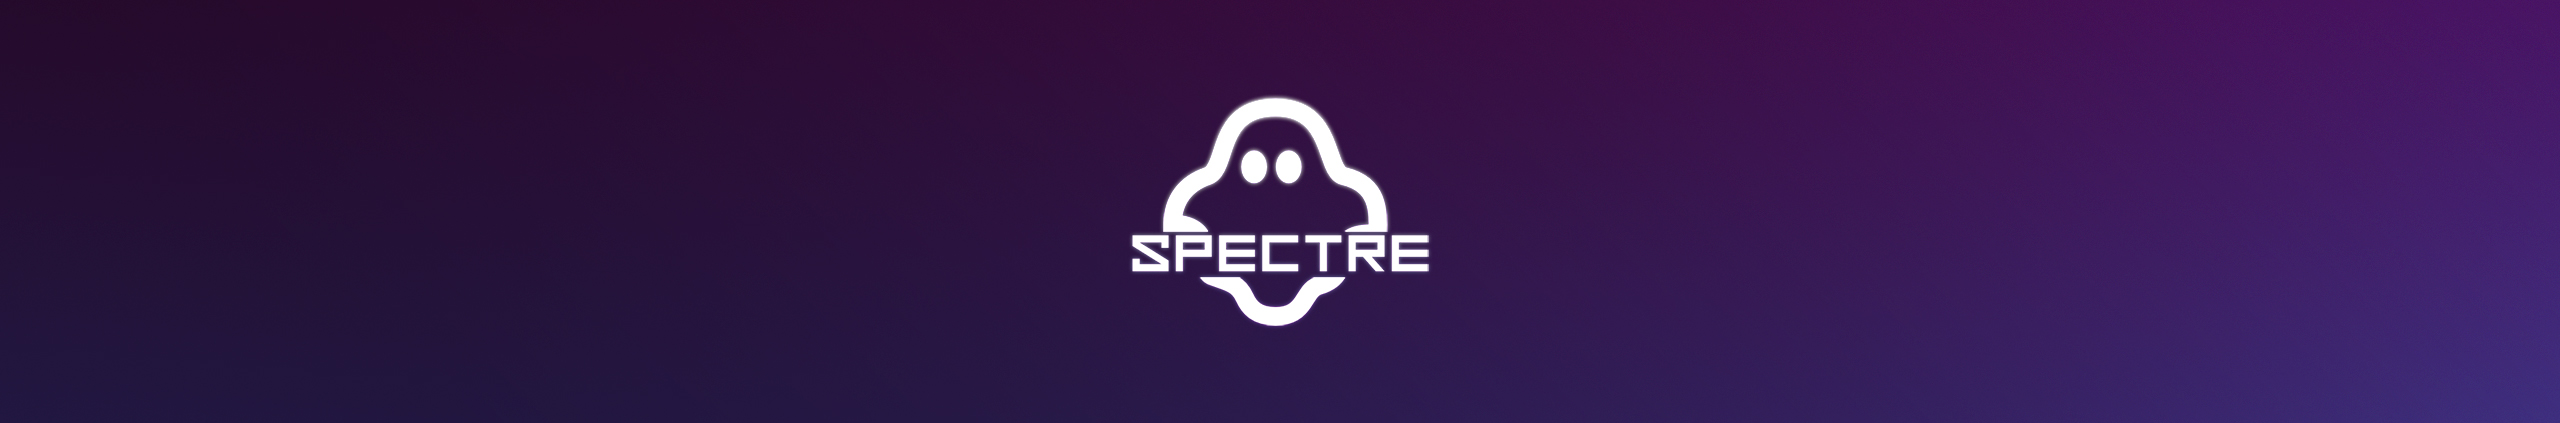 real spectre ghost